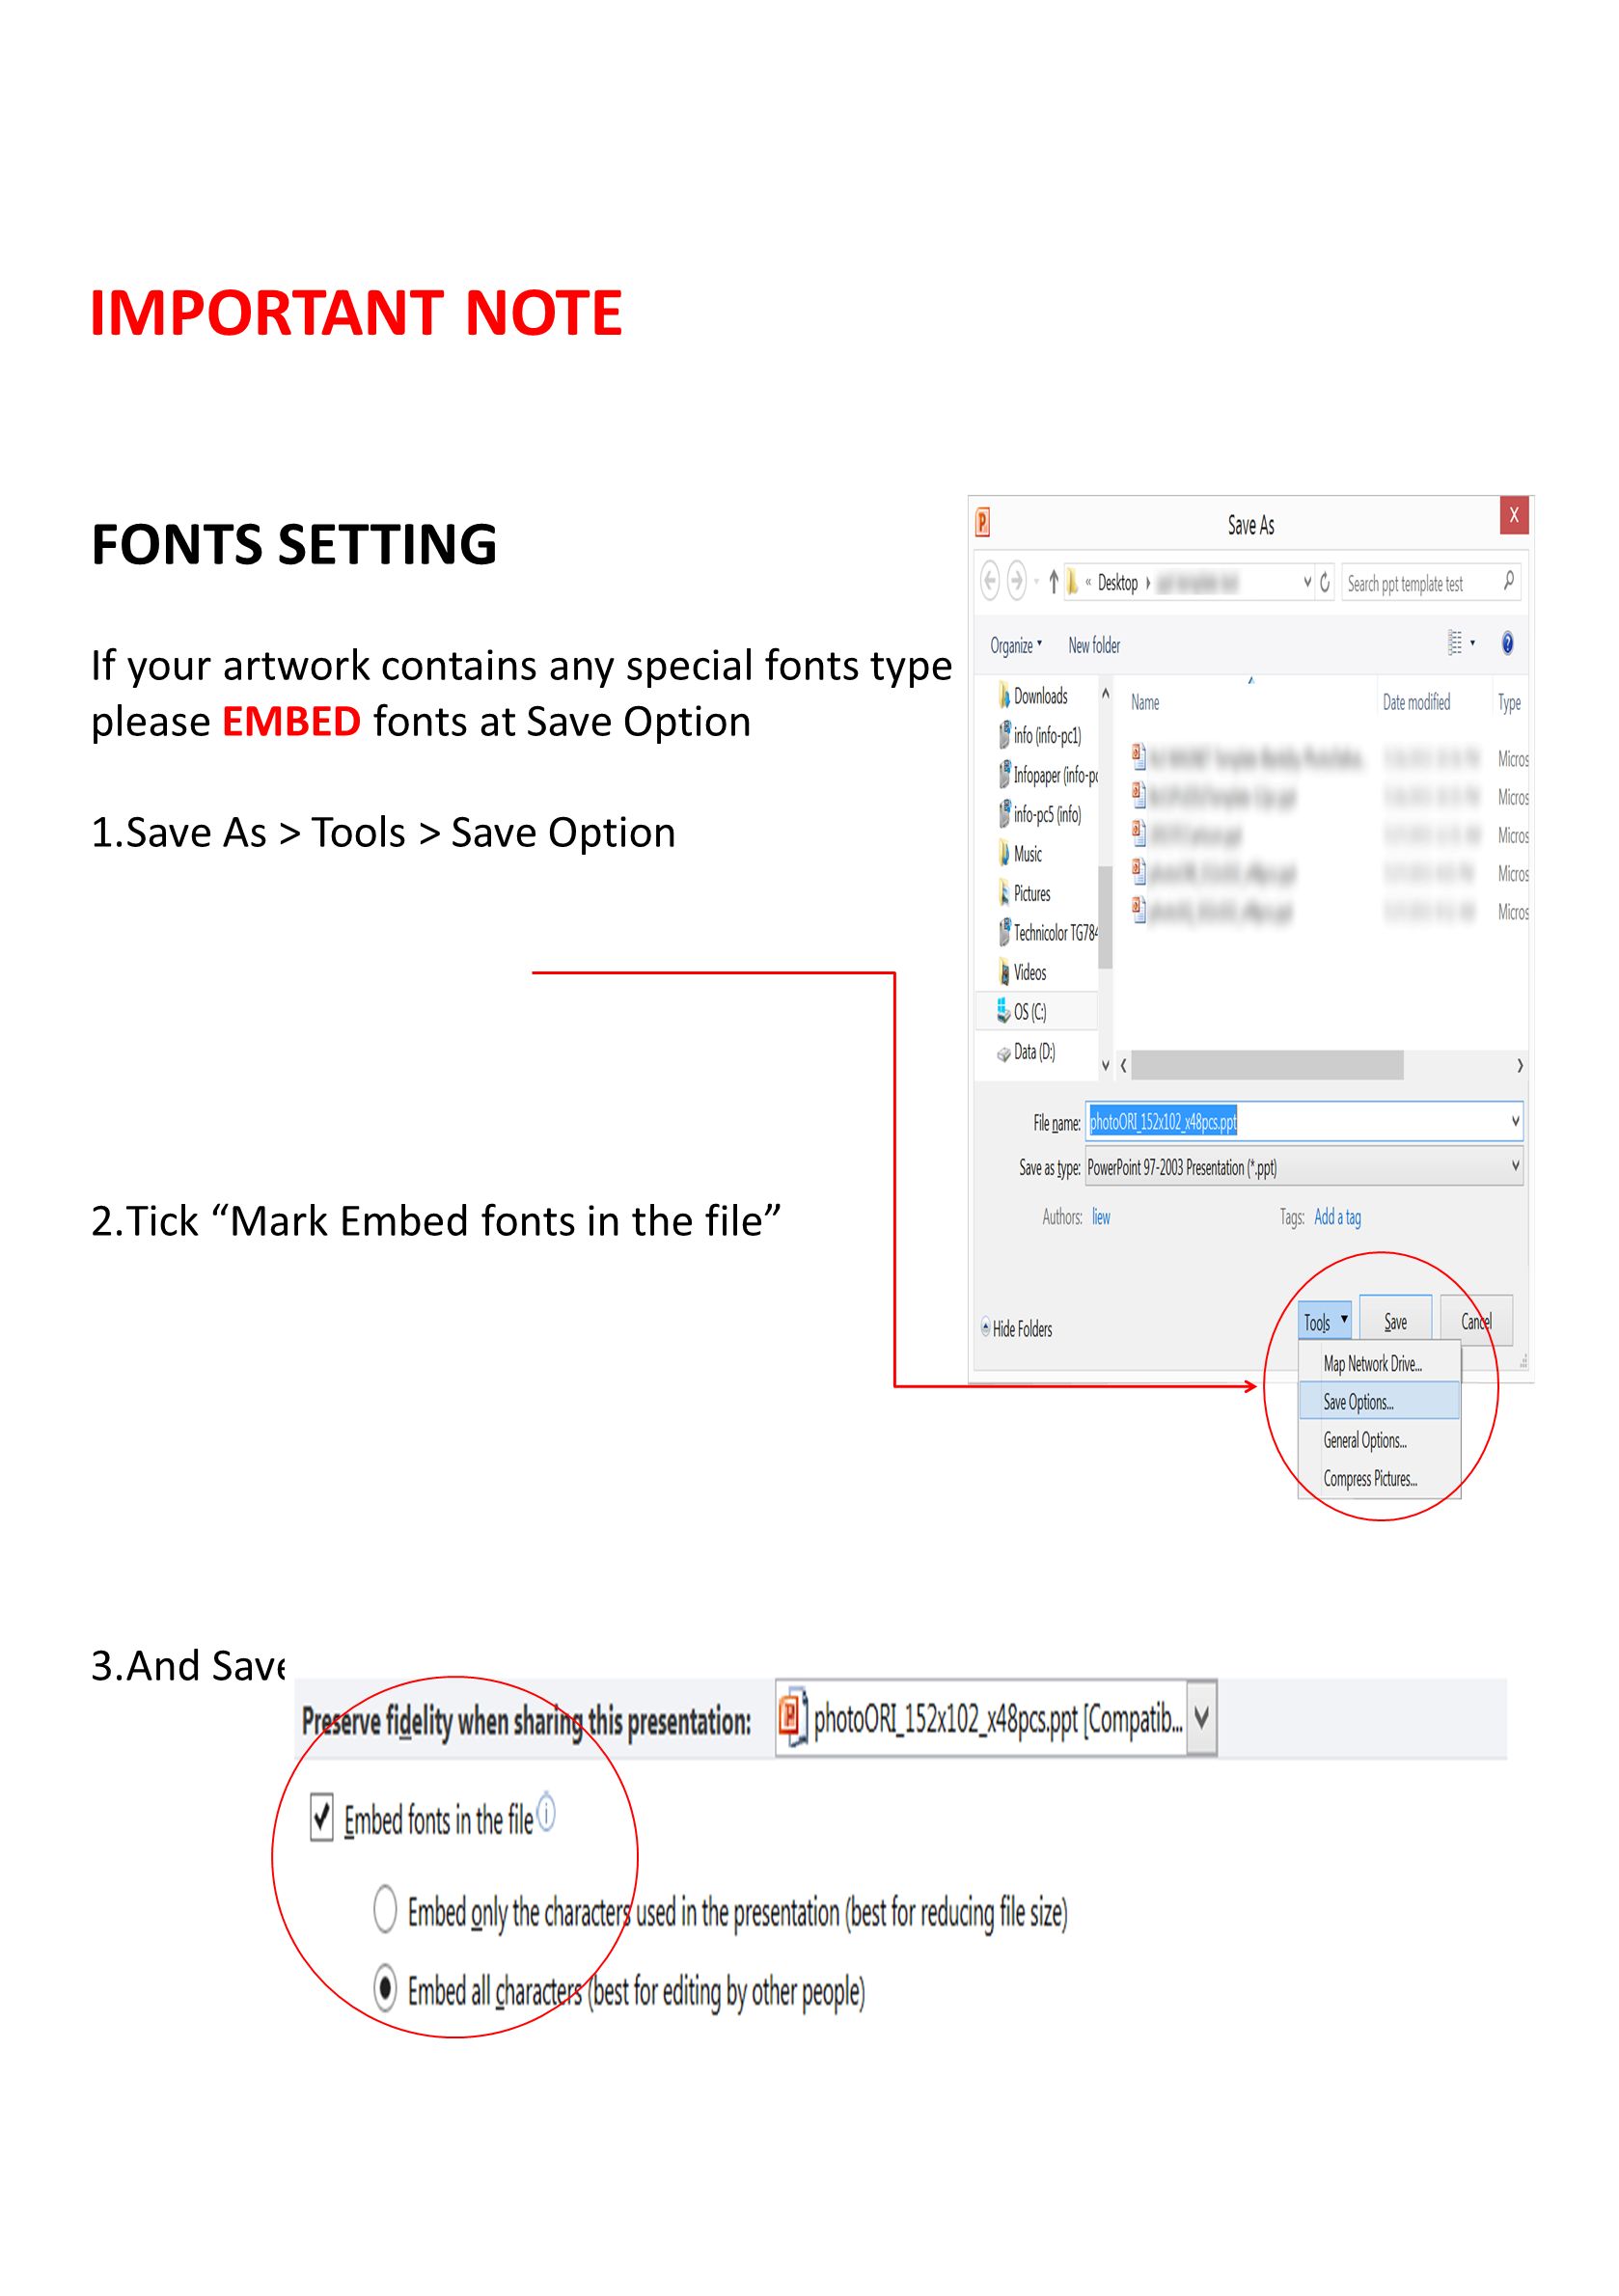 FONTS SETTING If your artwork contains any special fonts type please EMBED fonts at Save Option 1.Save As > Tools > Save Option 2.Tick Mark Embed fonts in the file 3.And Save the File IMPORTANT NOTE